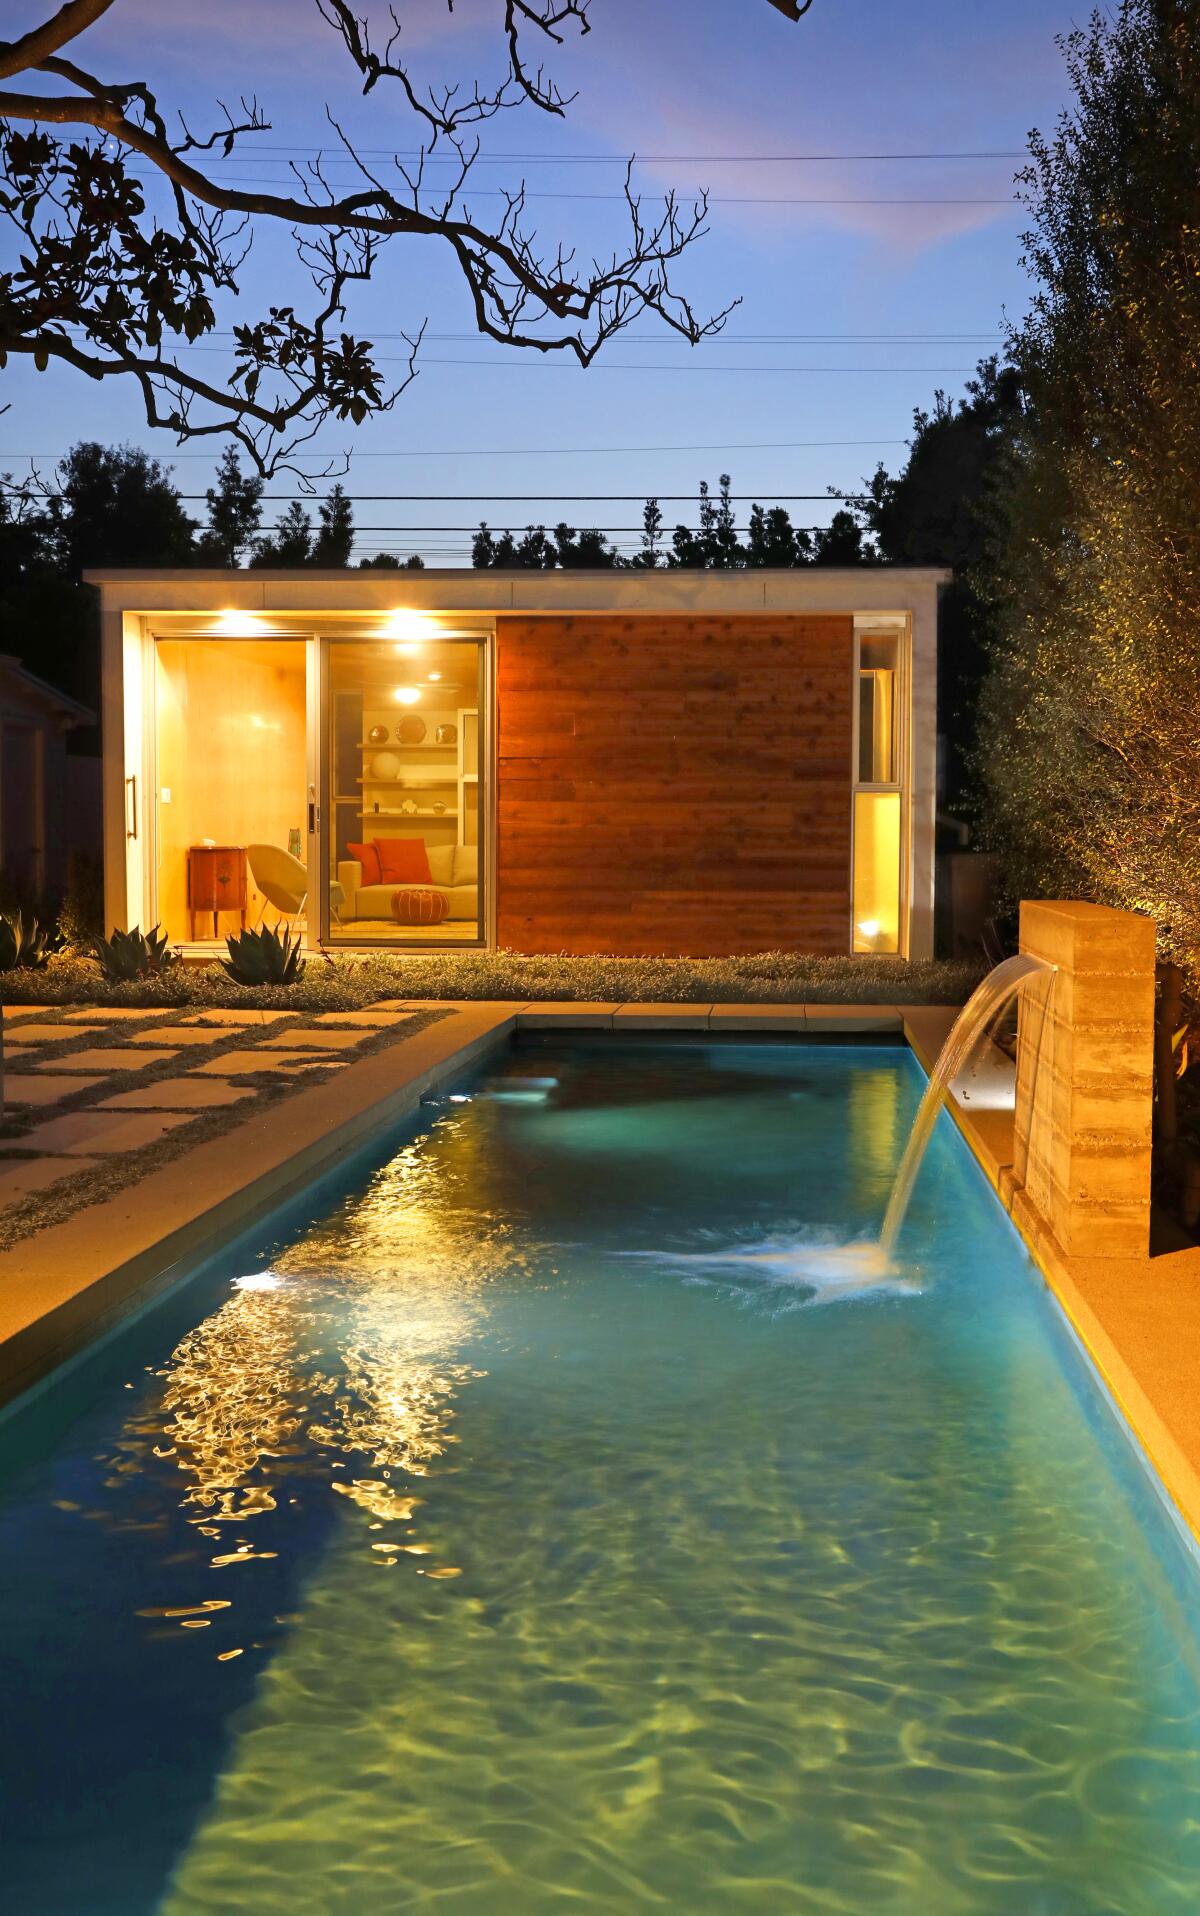 An ADU sits beyond a lap pool with a waterfall feature.